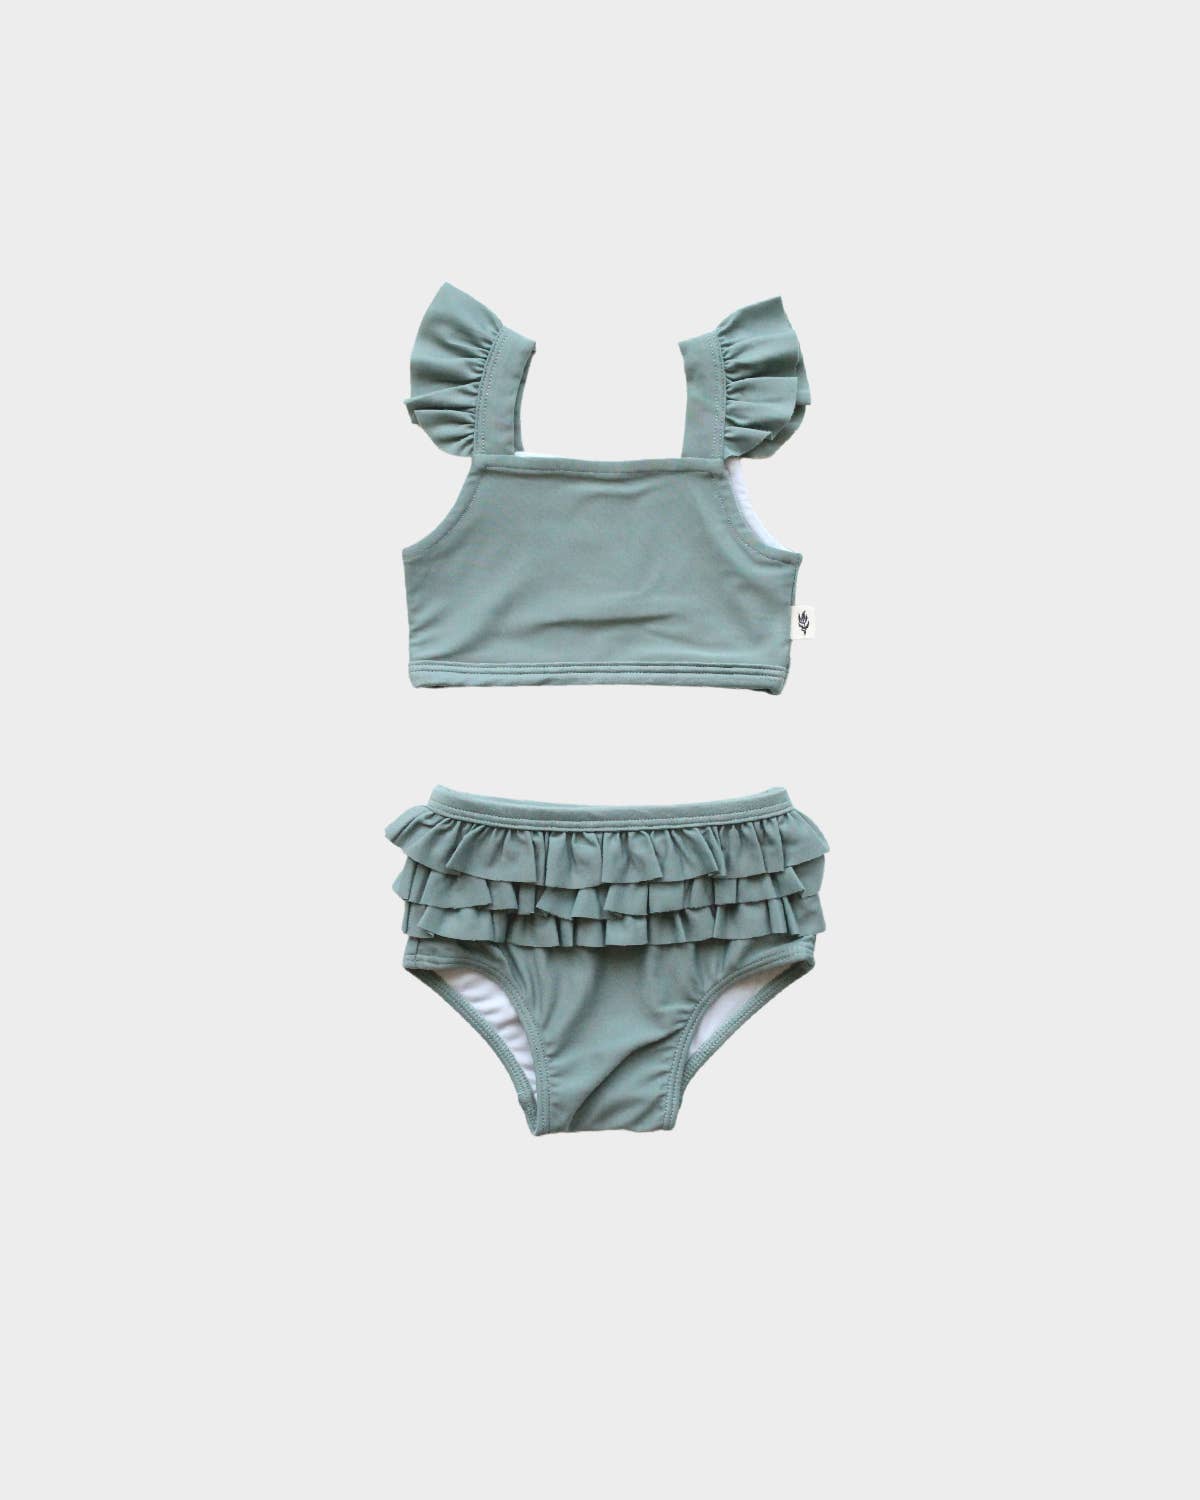 S23 D2: Baby Girl's Two-Piece Swim Suit in Teal Green